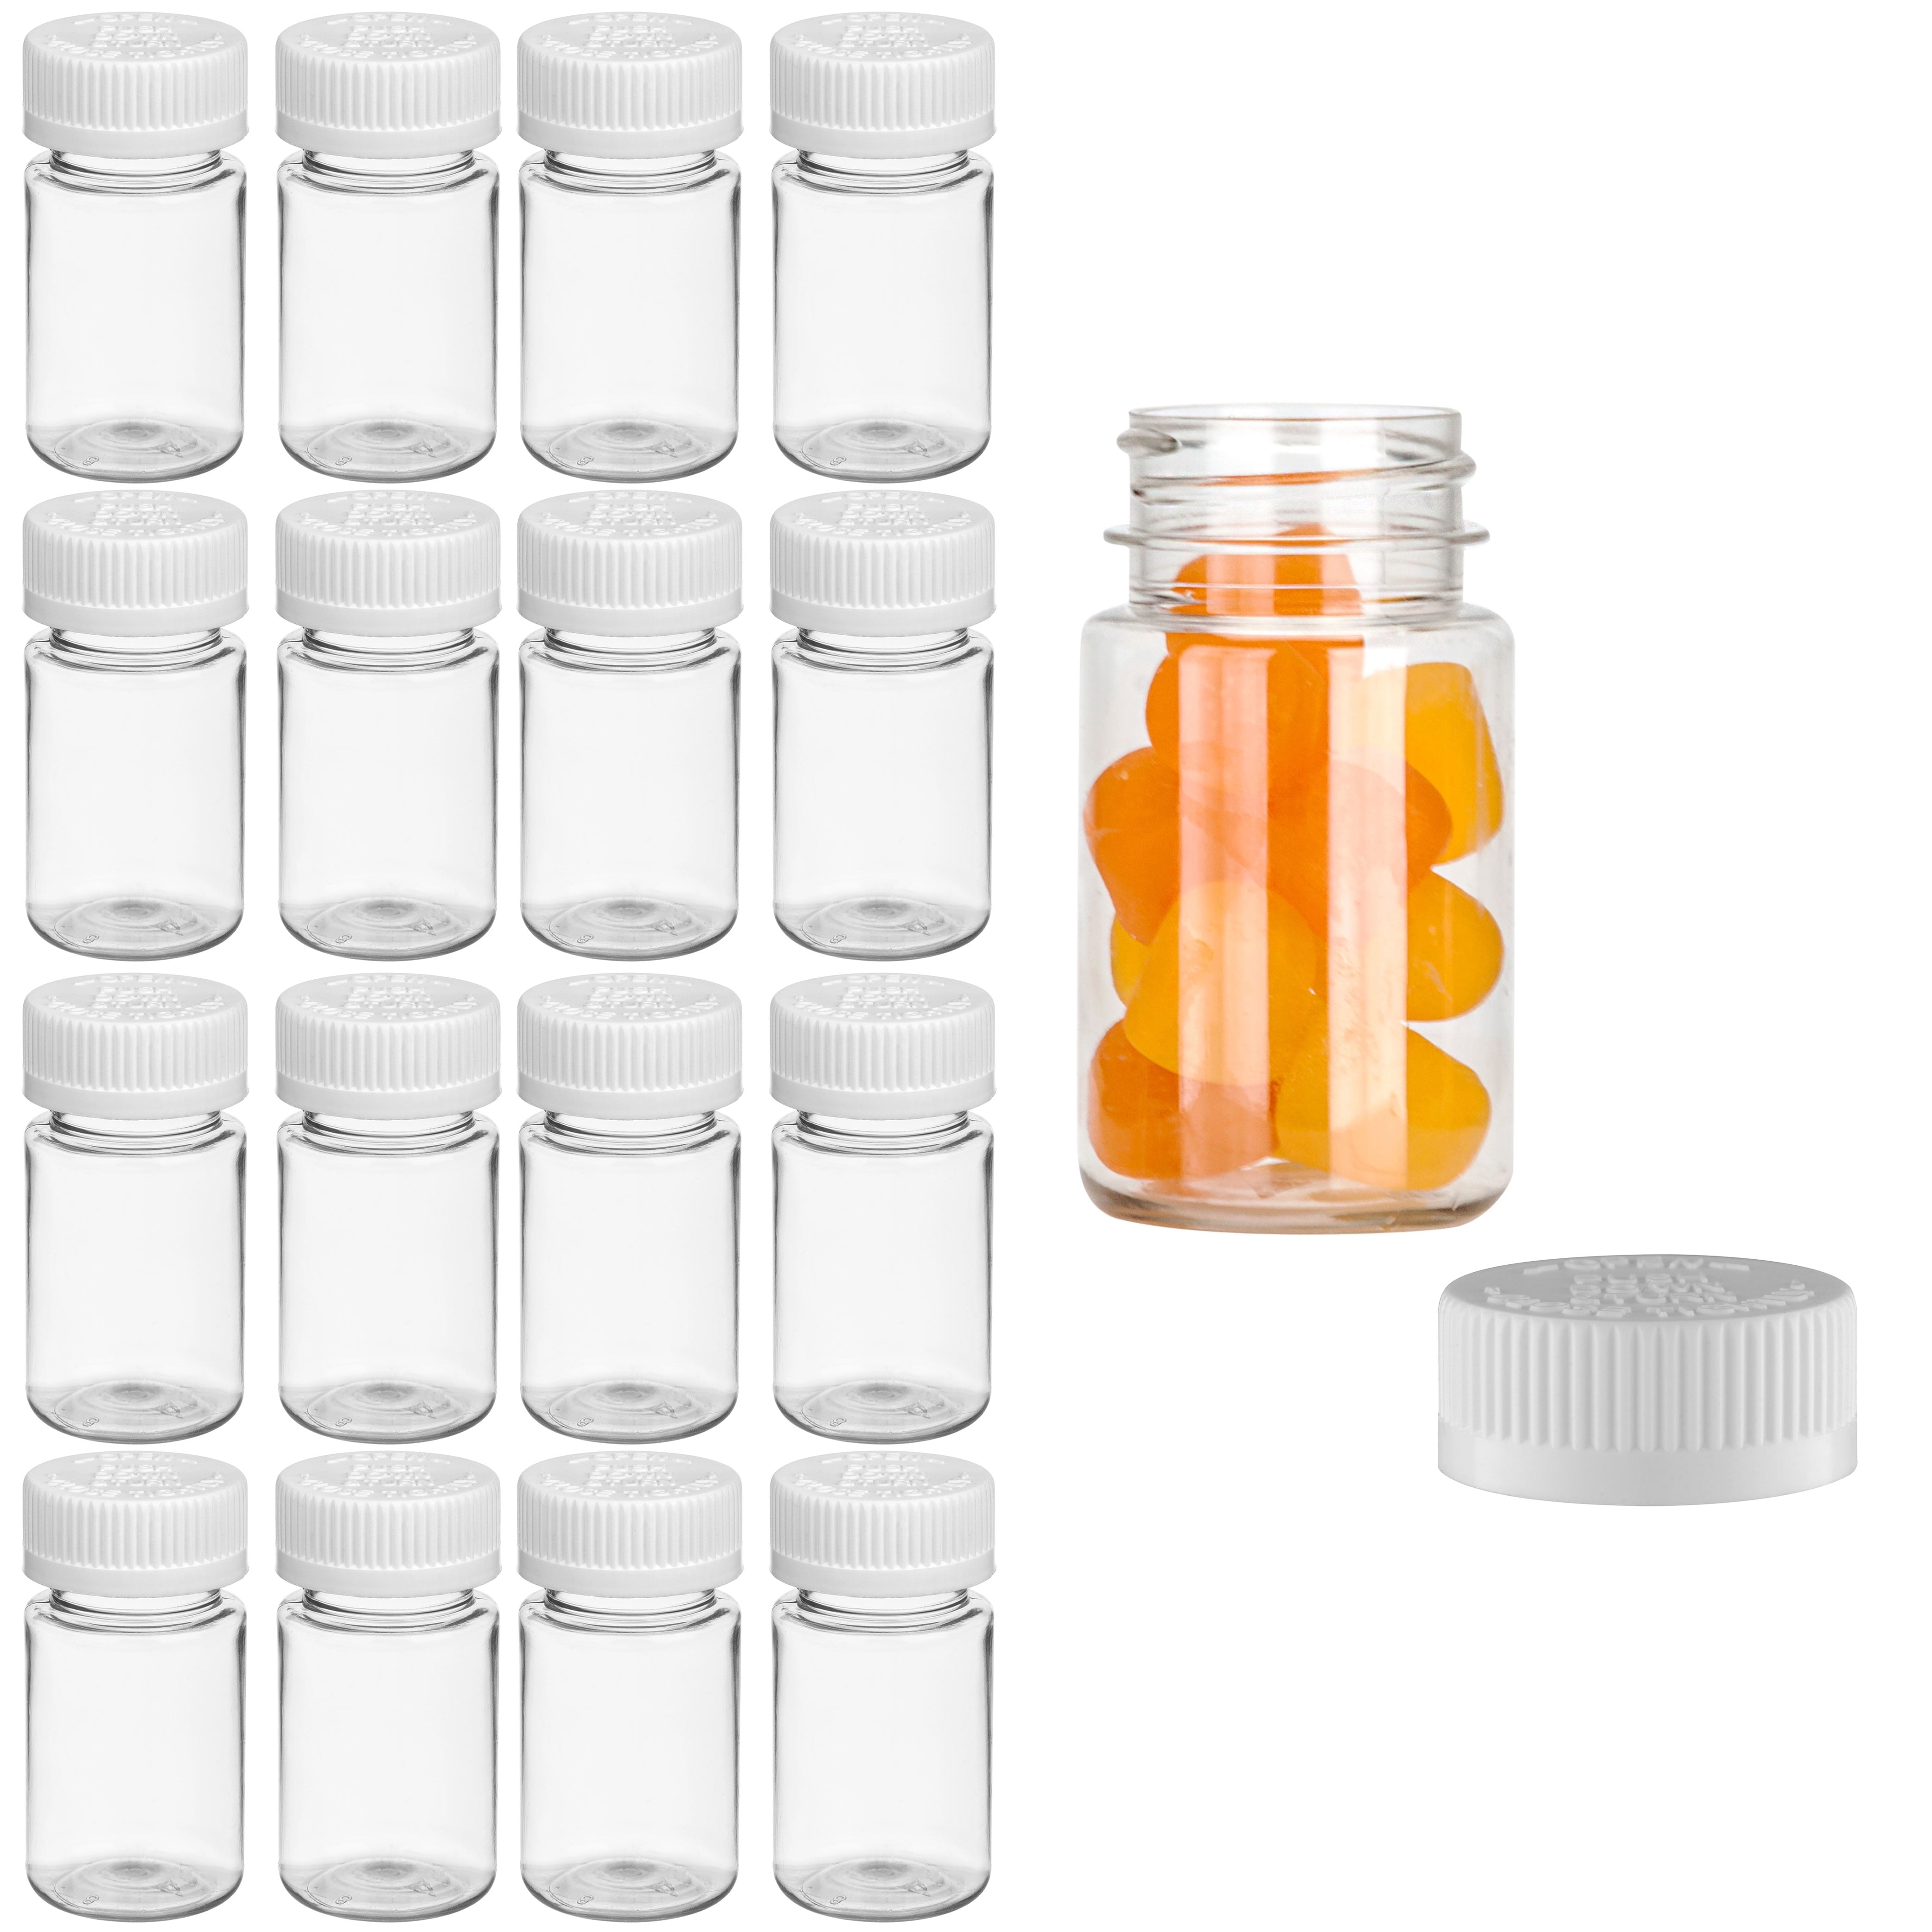 Amber Glass Medicine Bottles  Yankee Containers: Drums, Pails